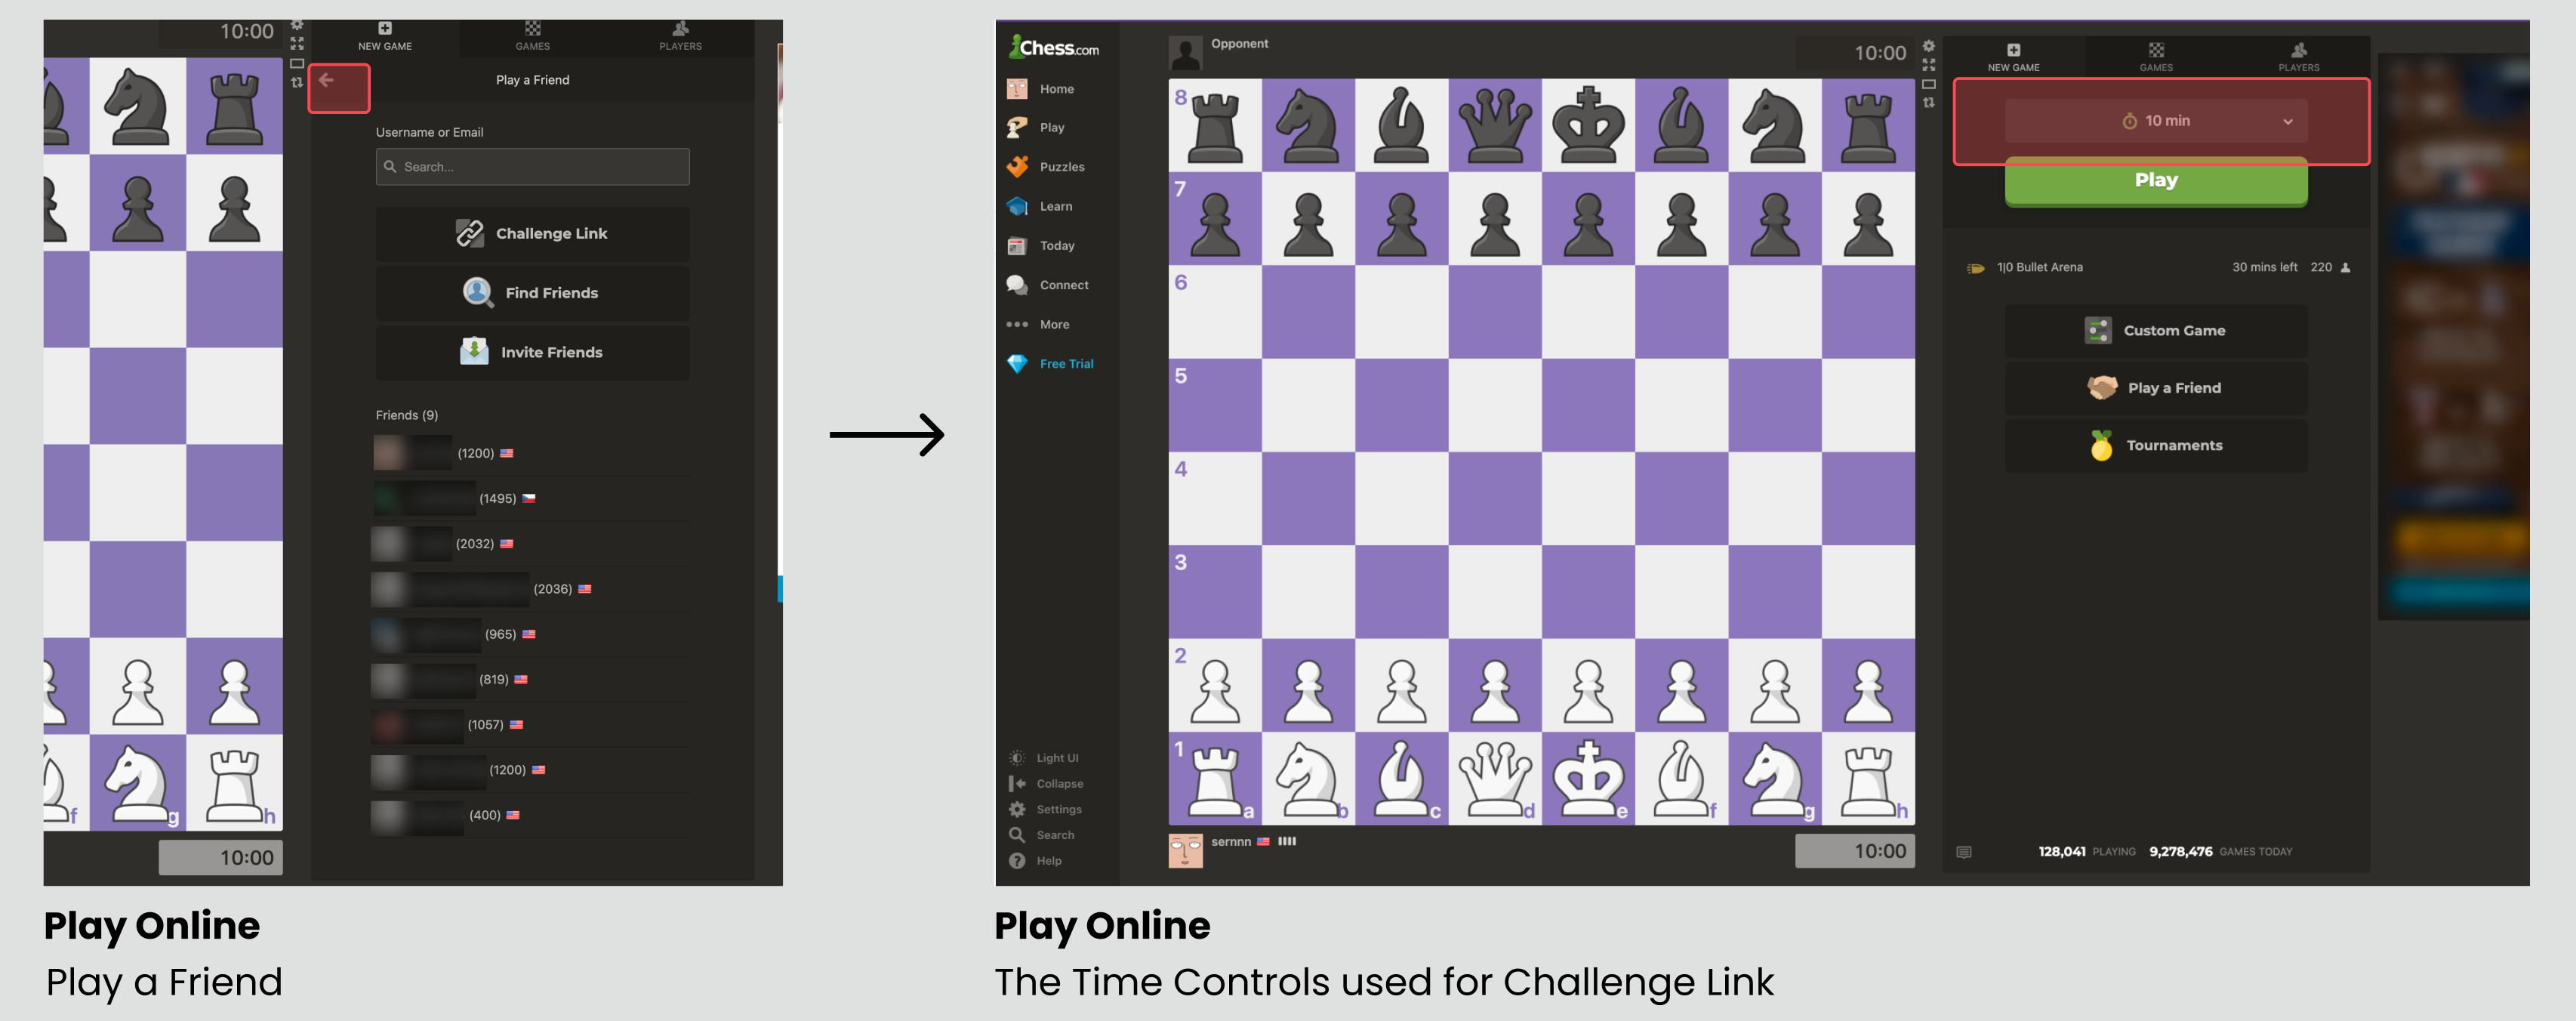 Lichess vs Chess.com, Battle of the Top 2 Chess Websites 